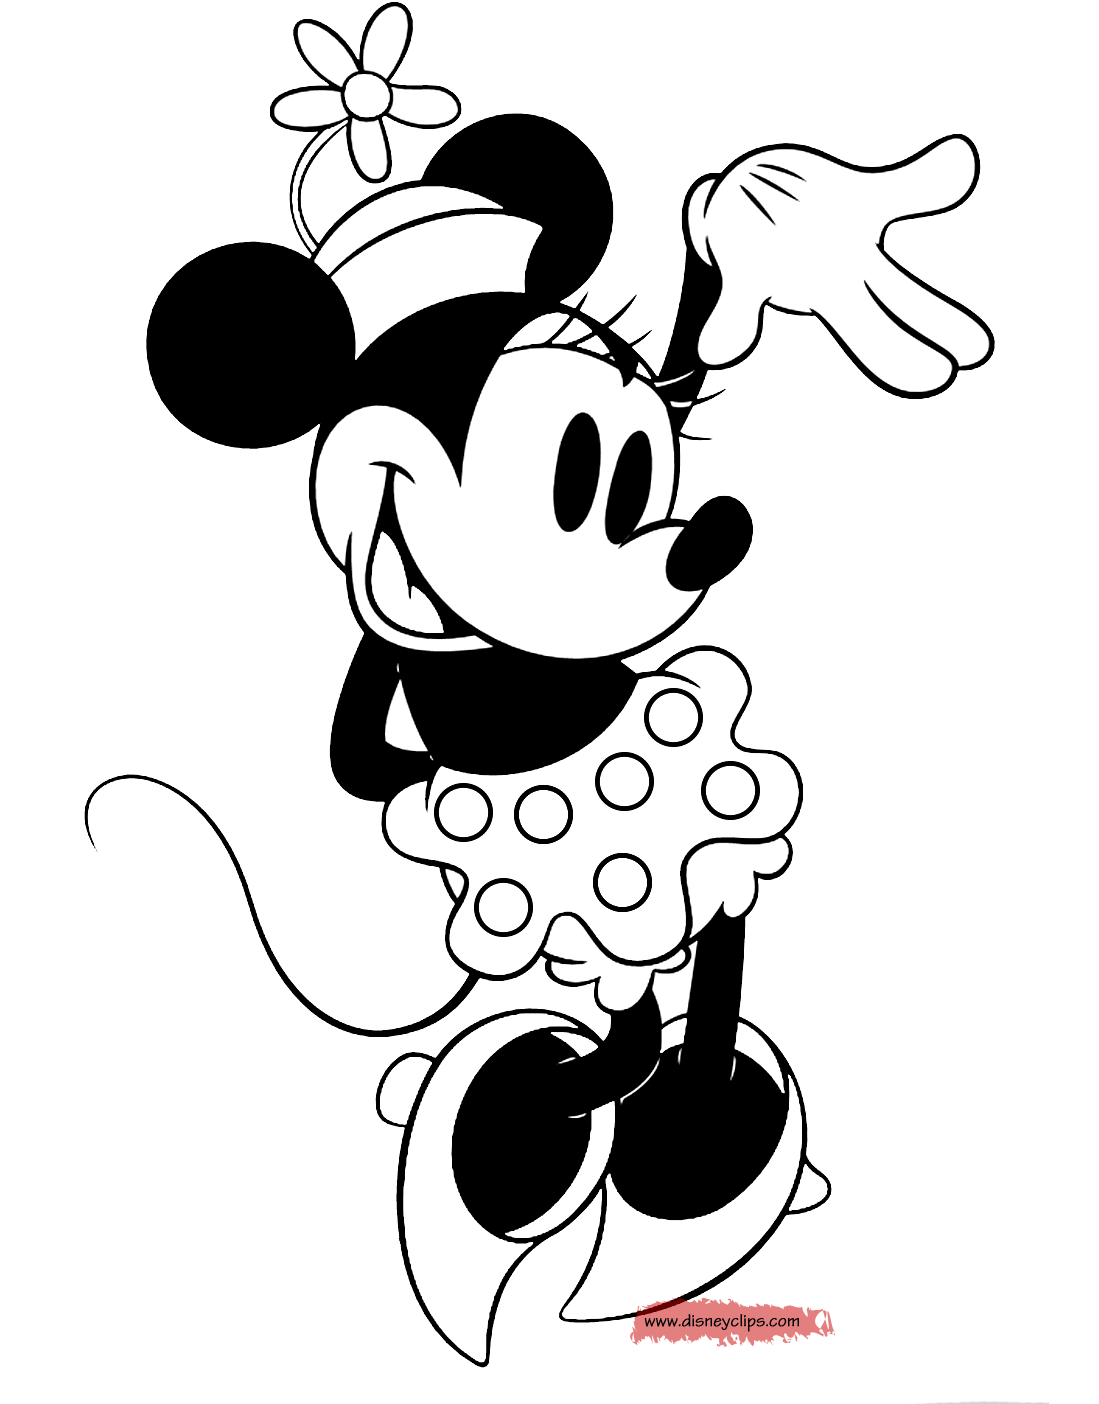 Minnie Mouse Printable Coloring Pages 6 | Disney Coloring Book